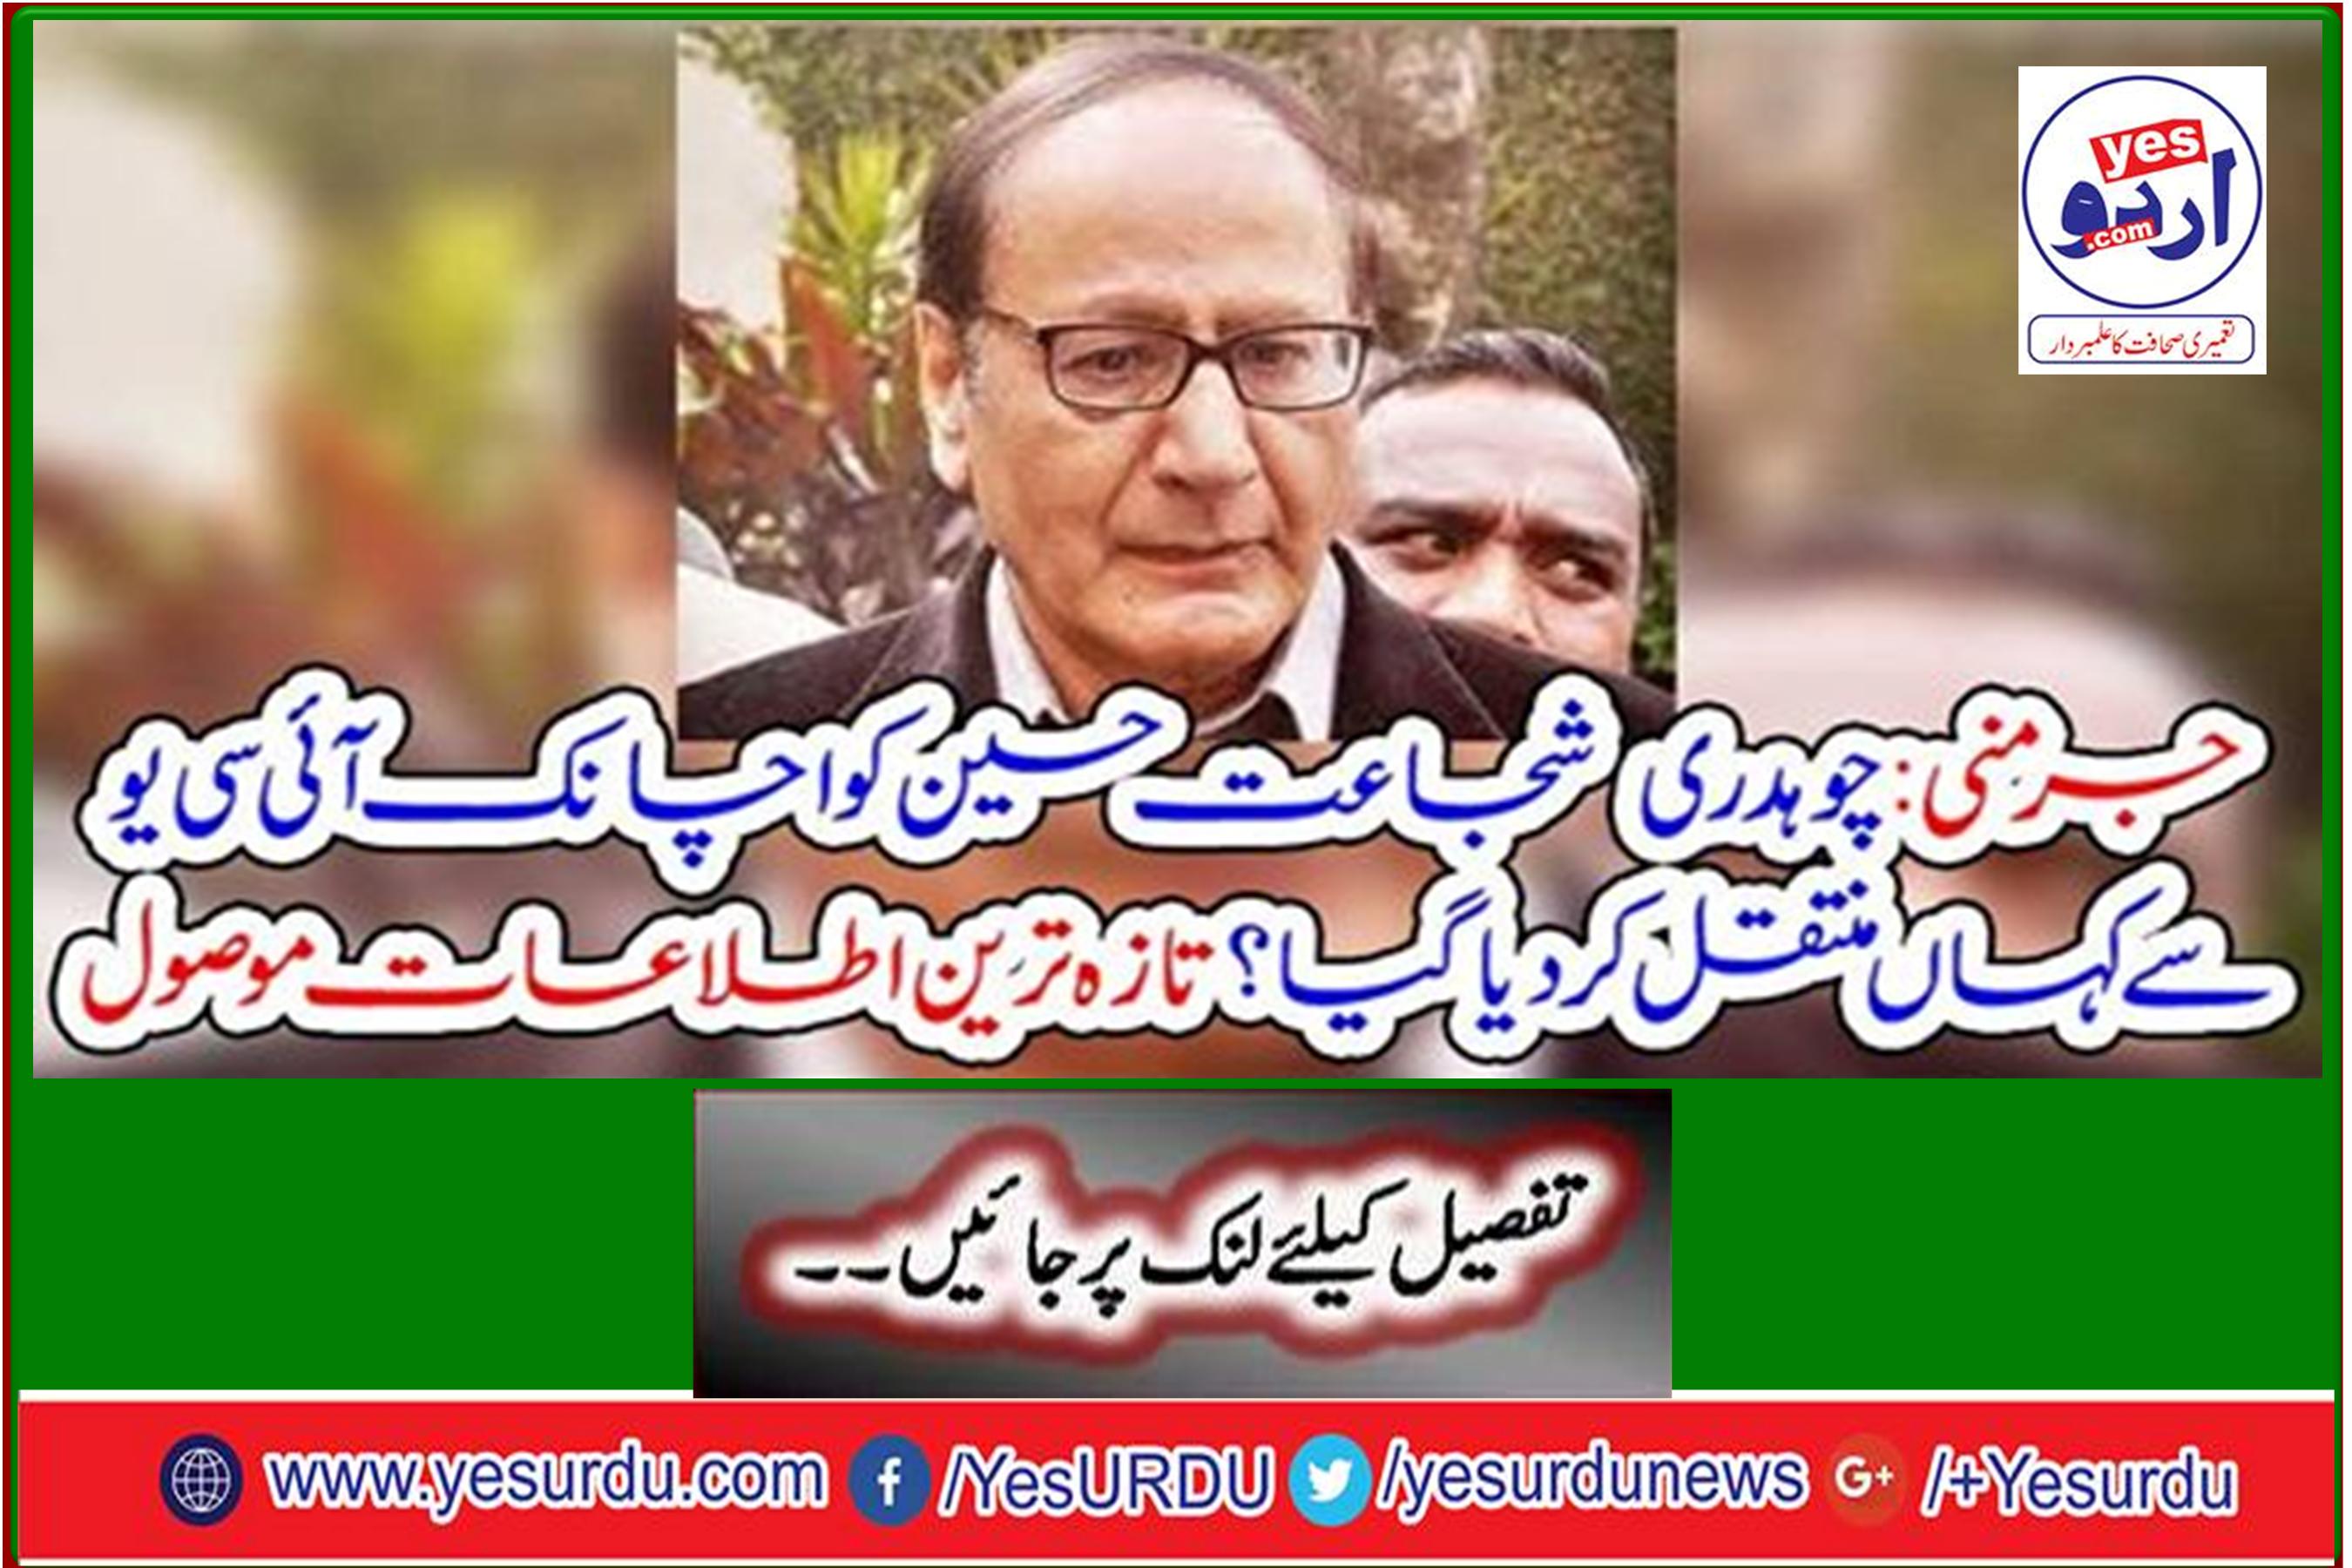 Germany: Where was Chaudhry Shujaat Hussain suddenly transferred from the ICU? Received the latest notifications